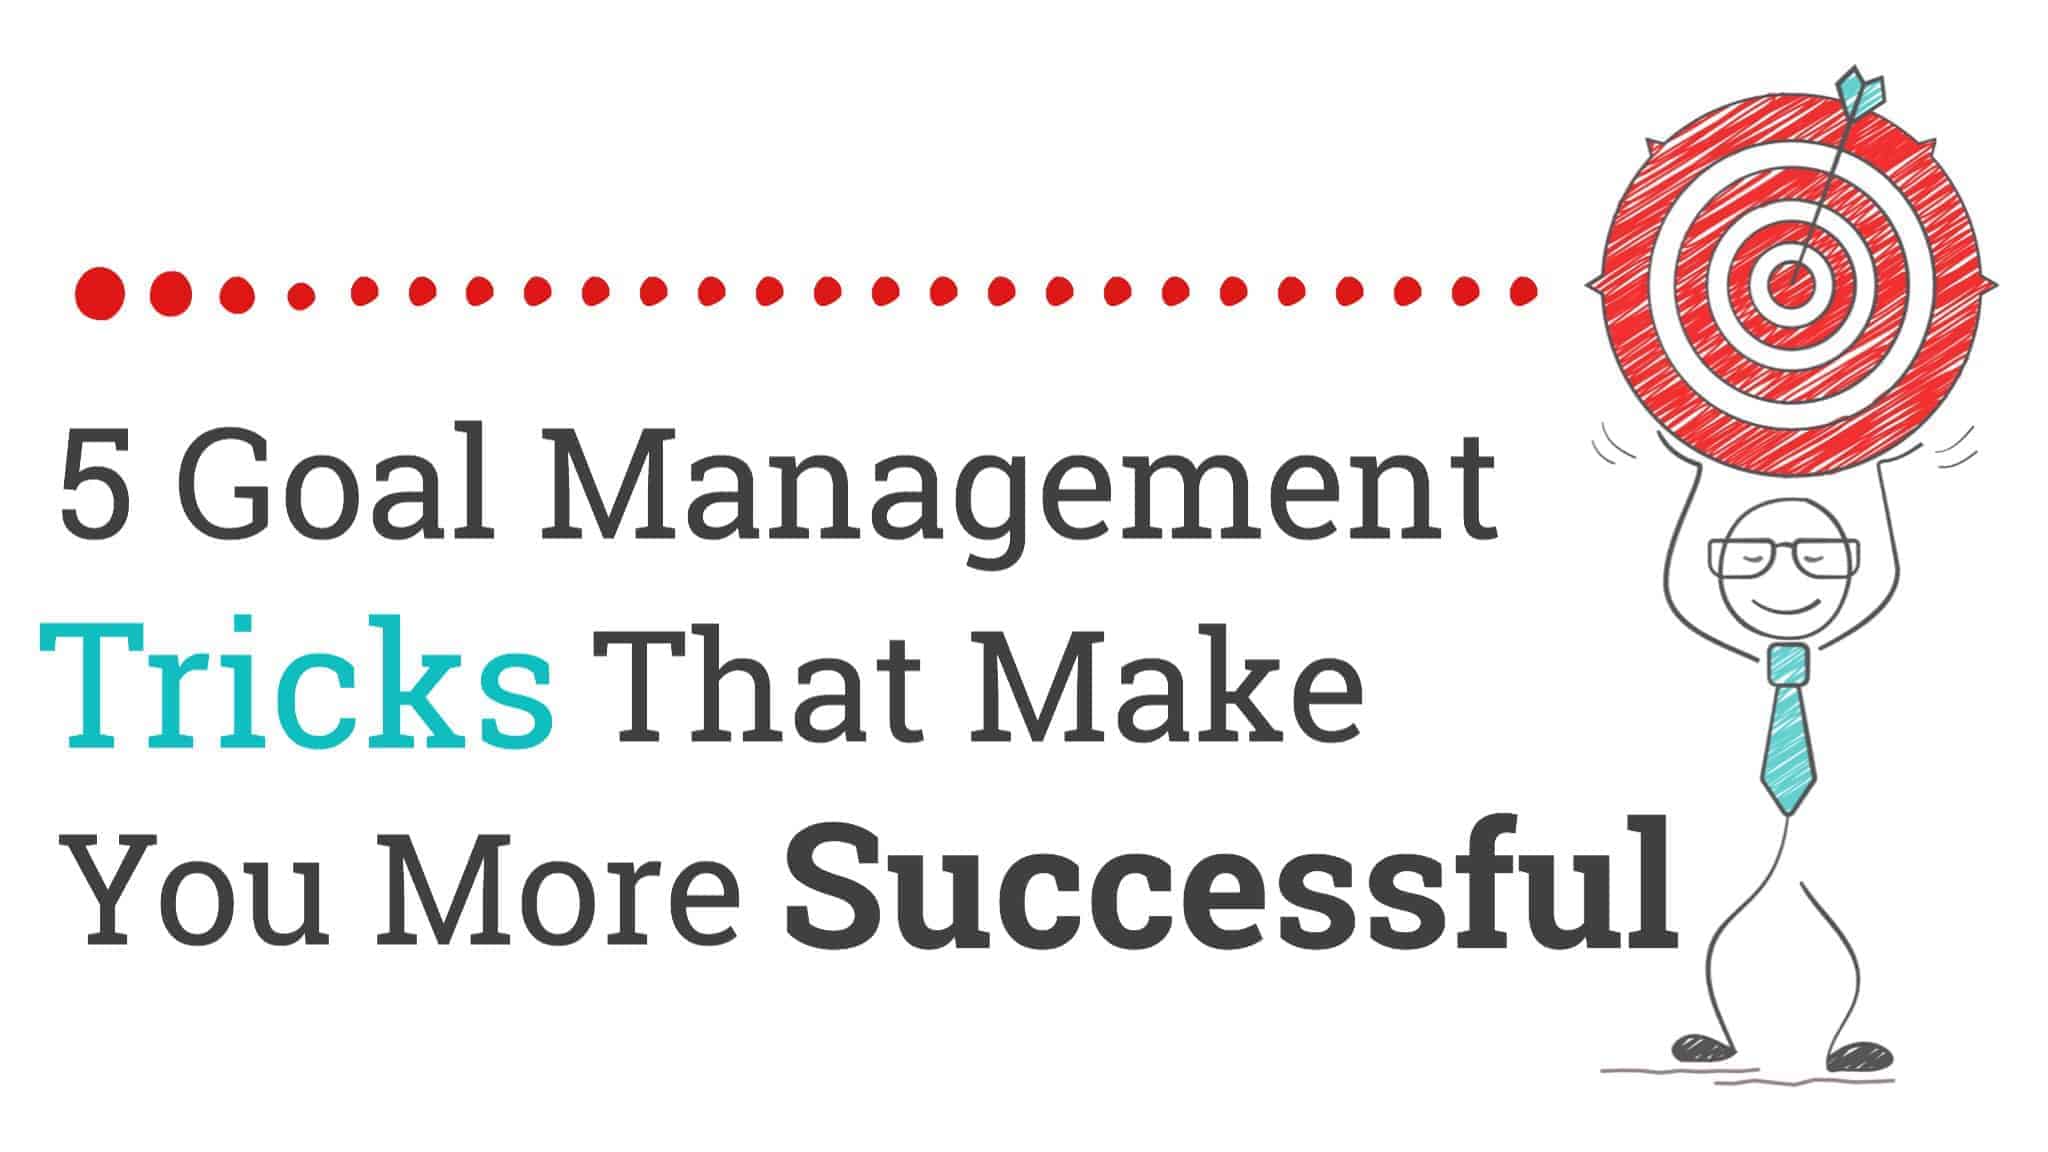 5 Goal Management Tricks That Make You More Successful